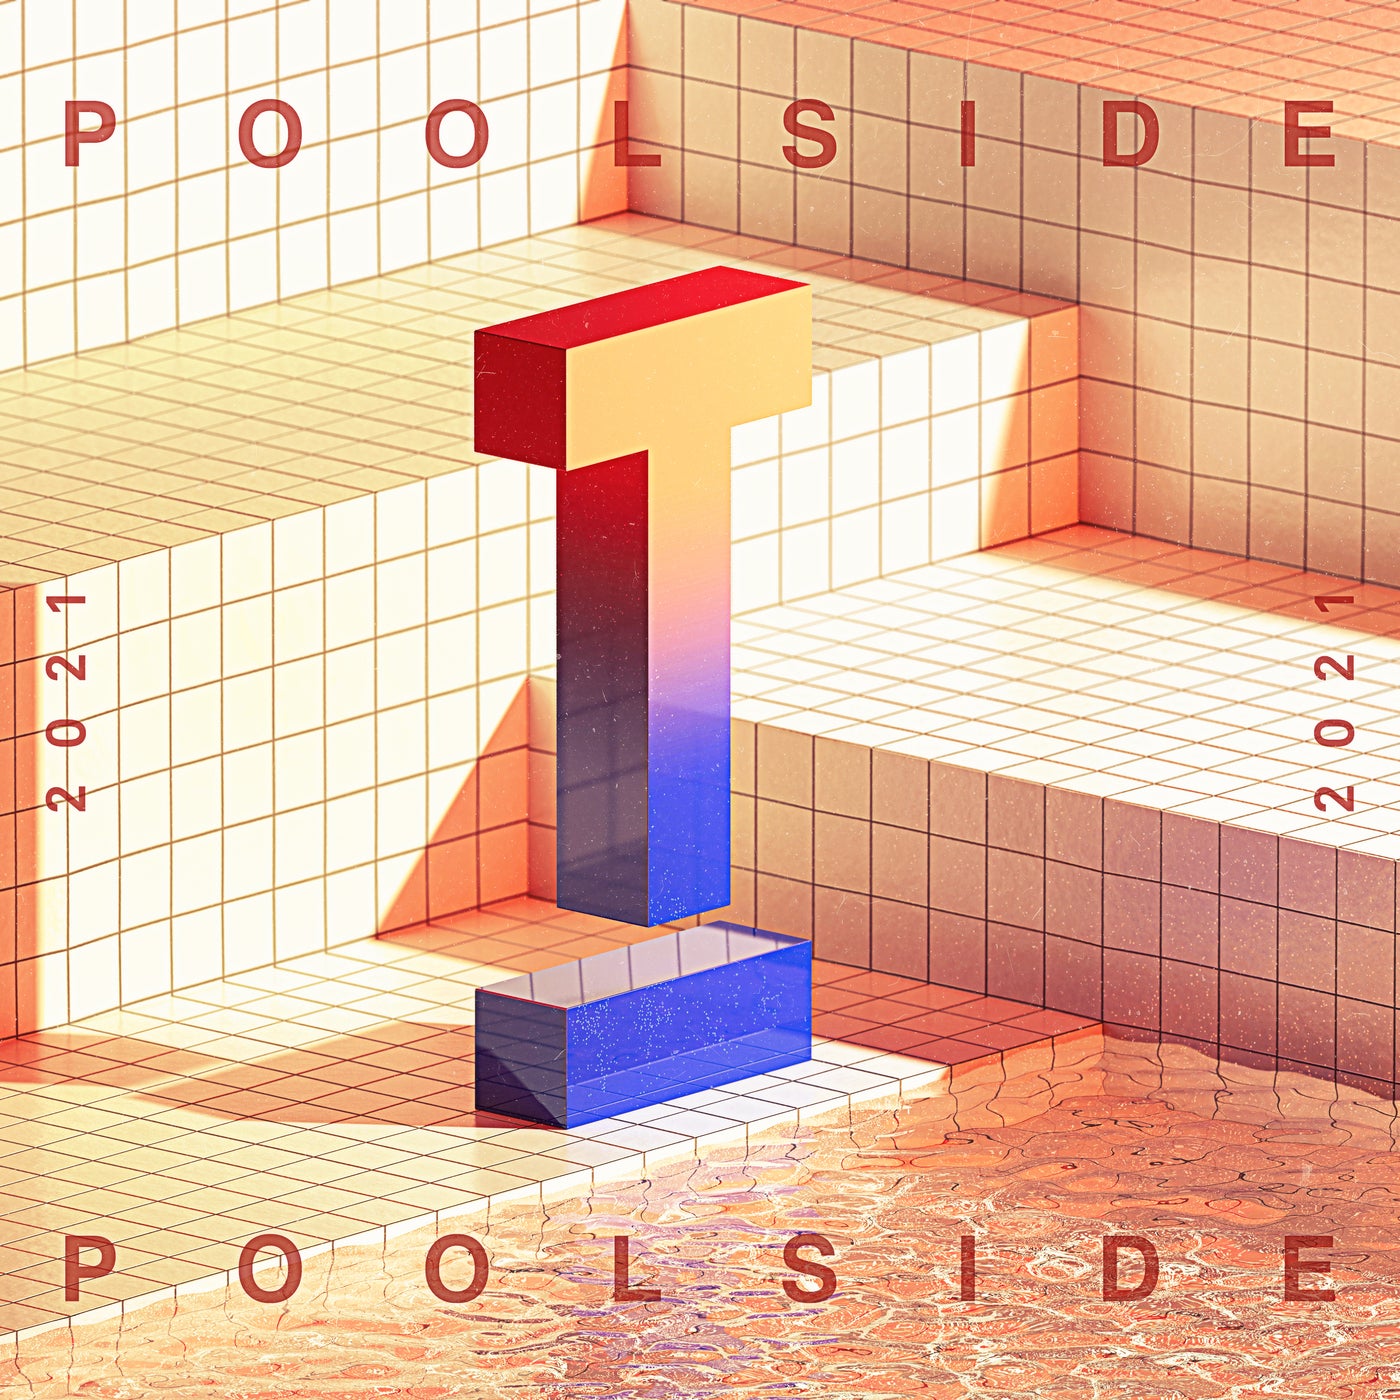 Download Toolroom Poolside 2021 on Electrobuzz